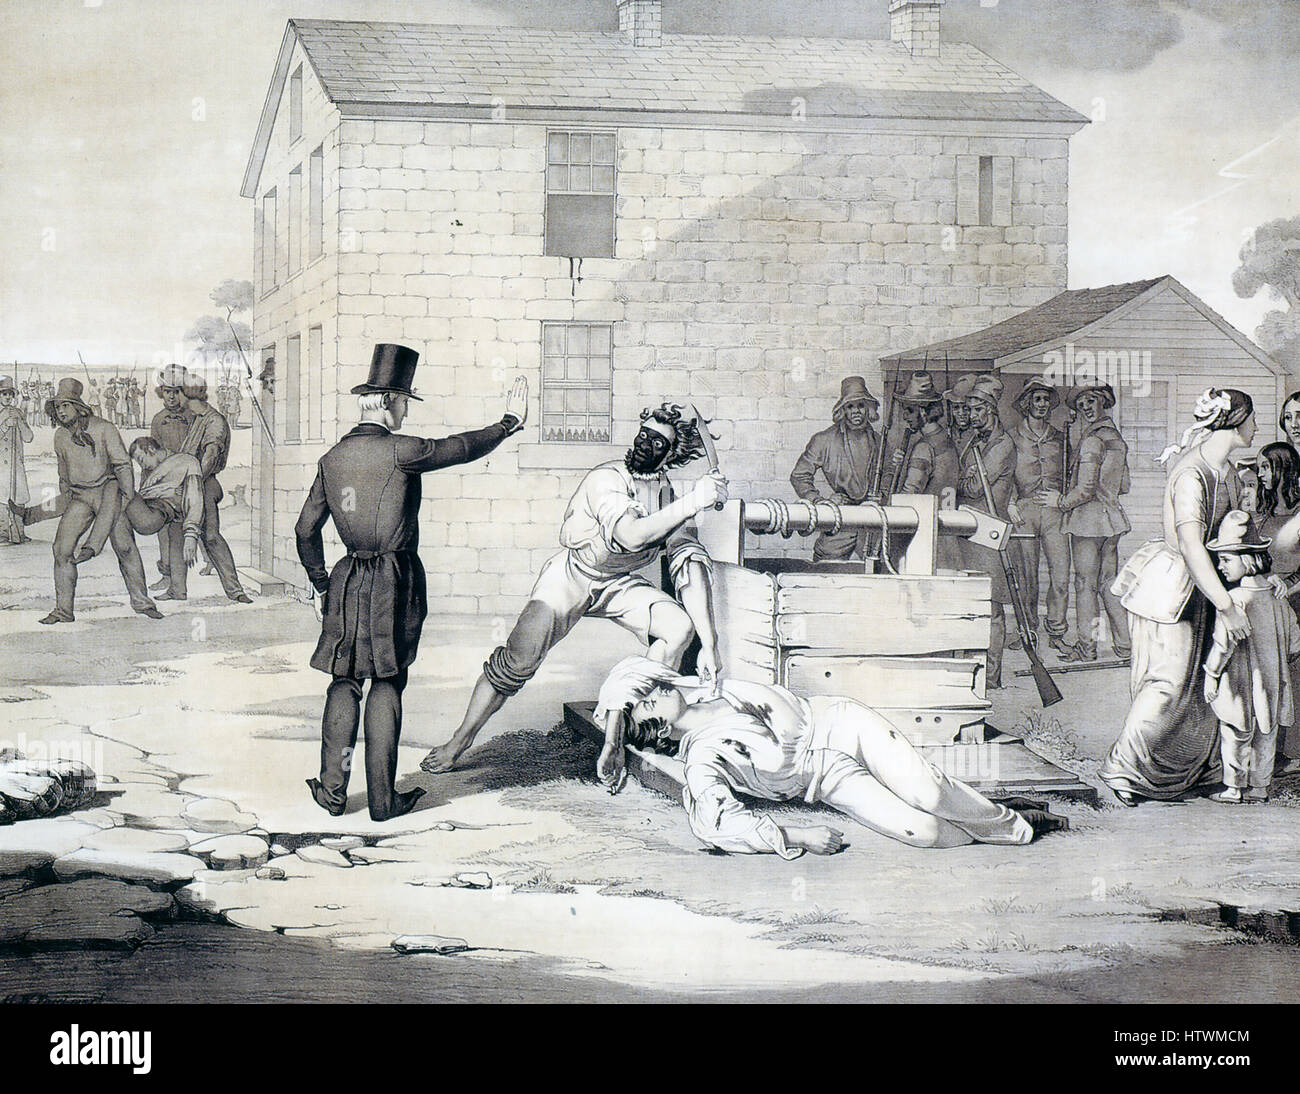 MARTYRDOM OF JOSEPH AND HIRAM SMITH  IN CARTHAGE JAIL JUNE 27th 1844. An 1851 lithograph showing the two dead Mormons outside the gaol in Carthage, Illinois. Hyrum's name is misspelt in the original caption shown here. Stock Photo